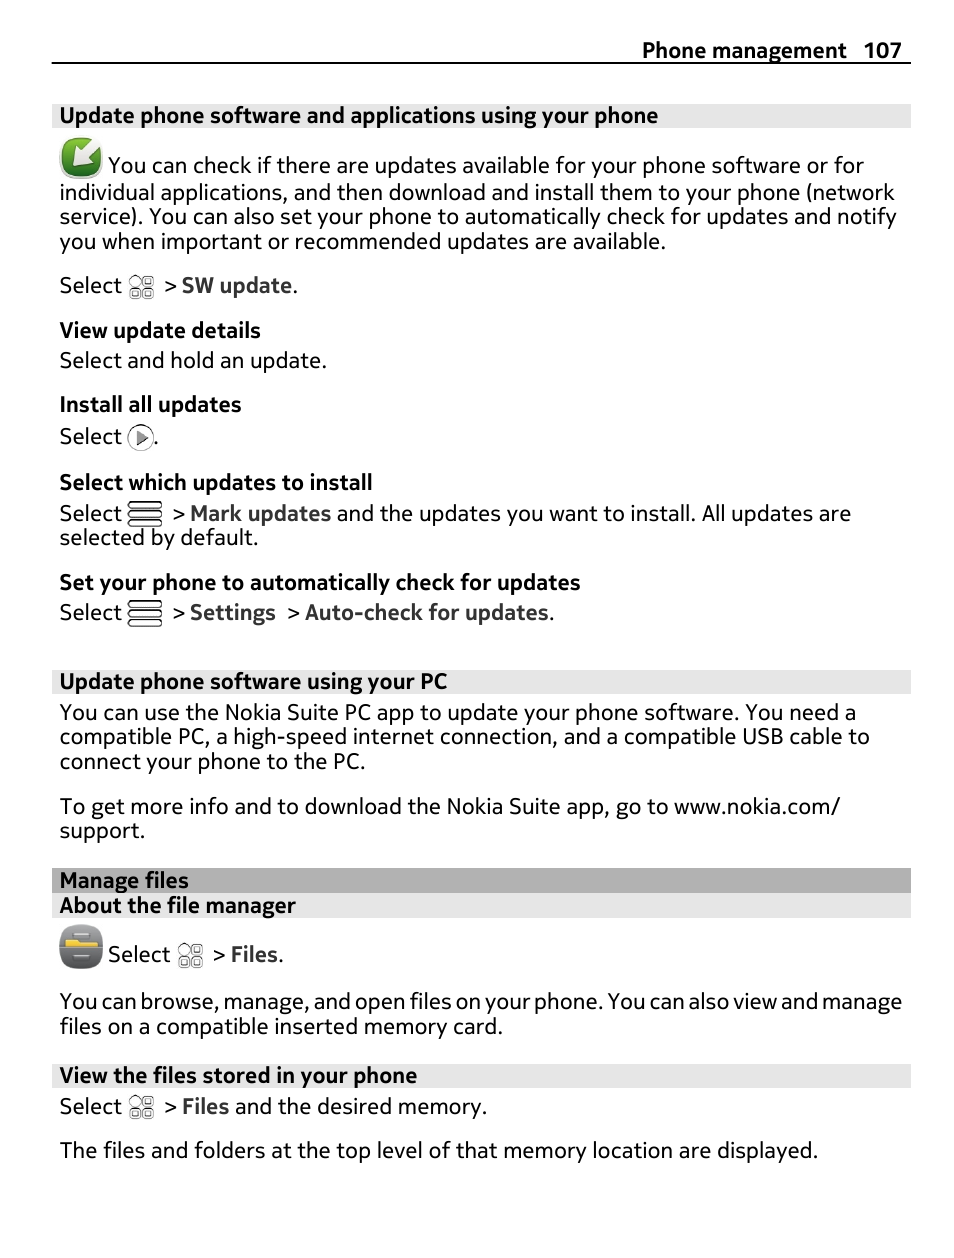 Update phone software using your pc, Manage files, About the file manager | Nokia  C7 User Manual | Page 107 / 138 | Original mode